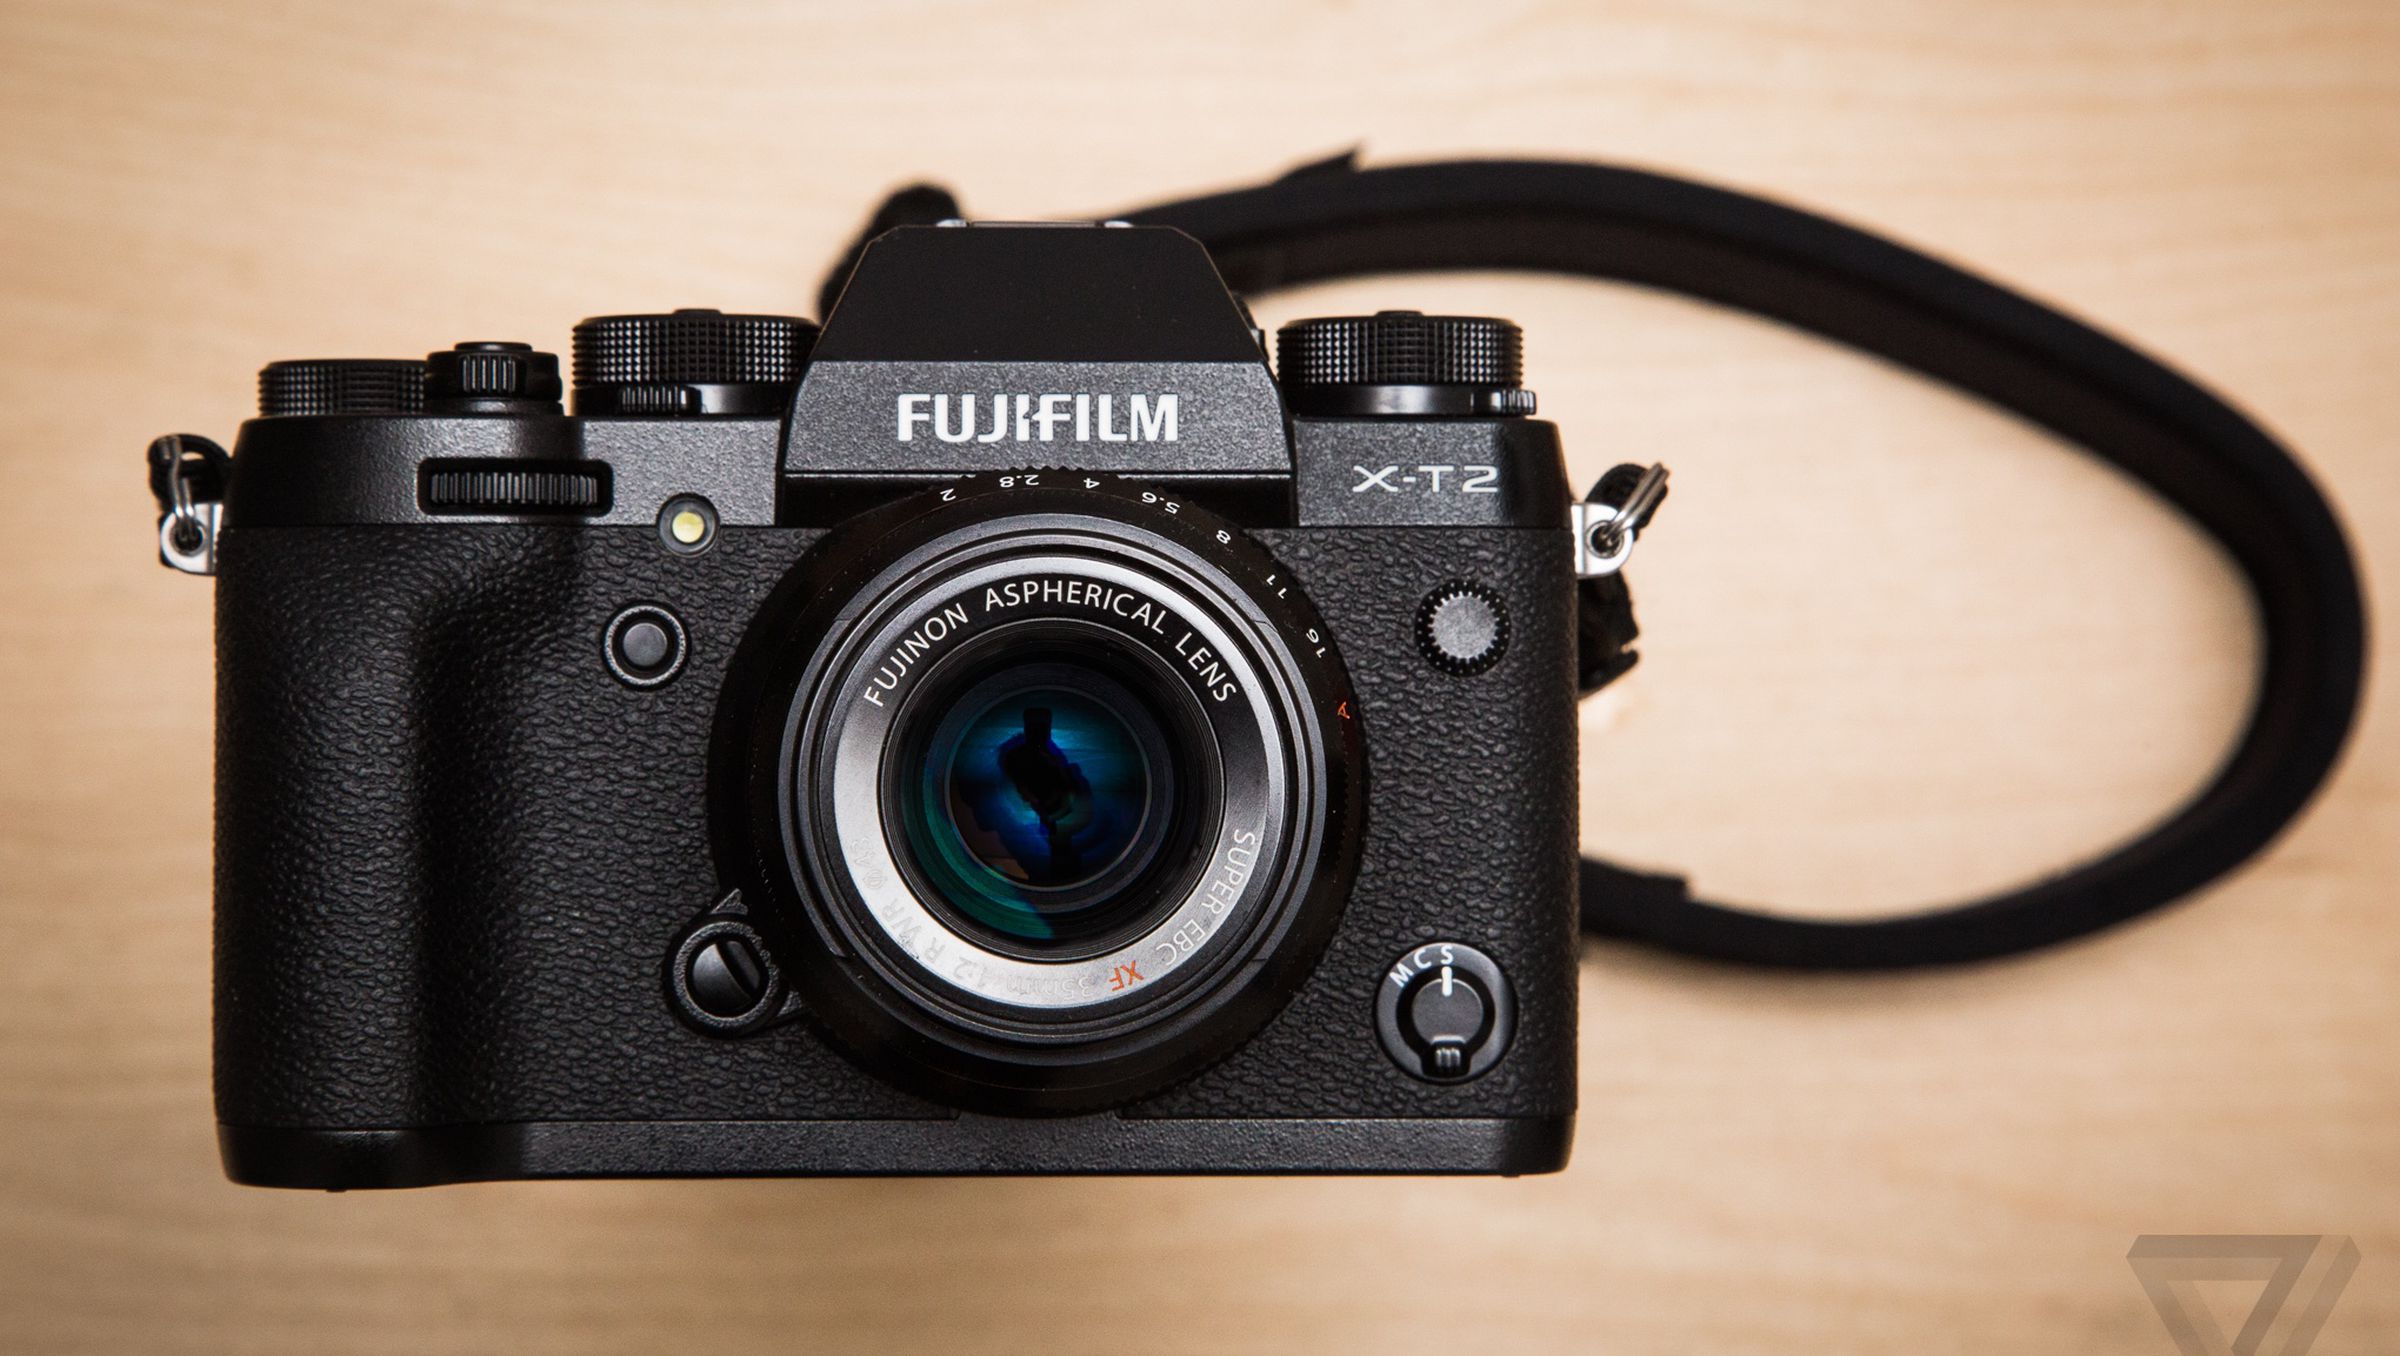 Fujifilm X-T2 review: for the love of photography - The Verge